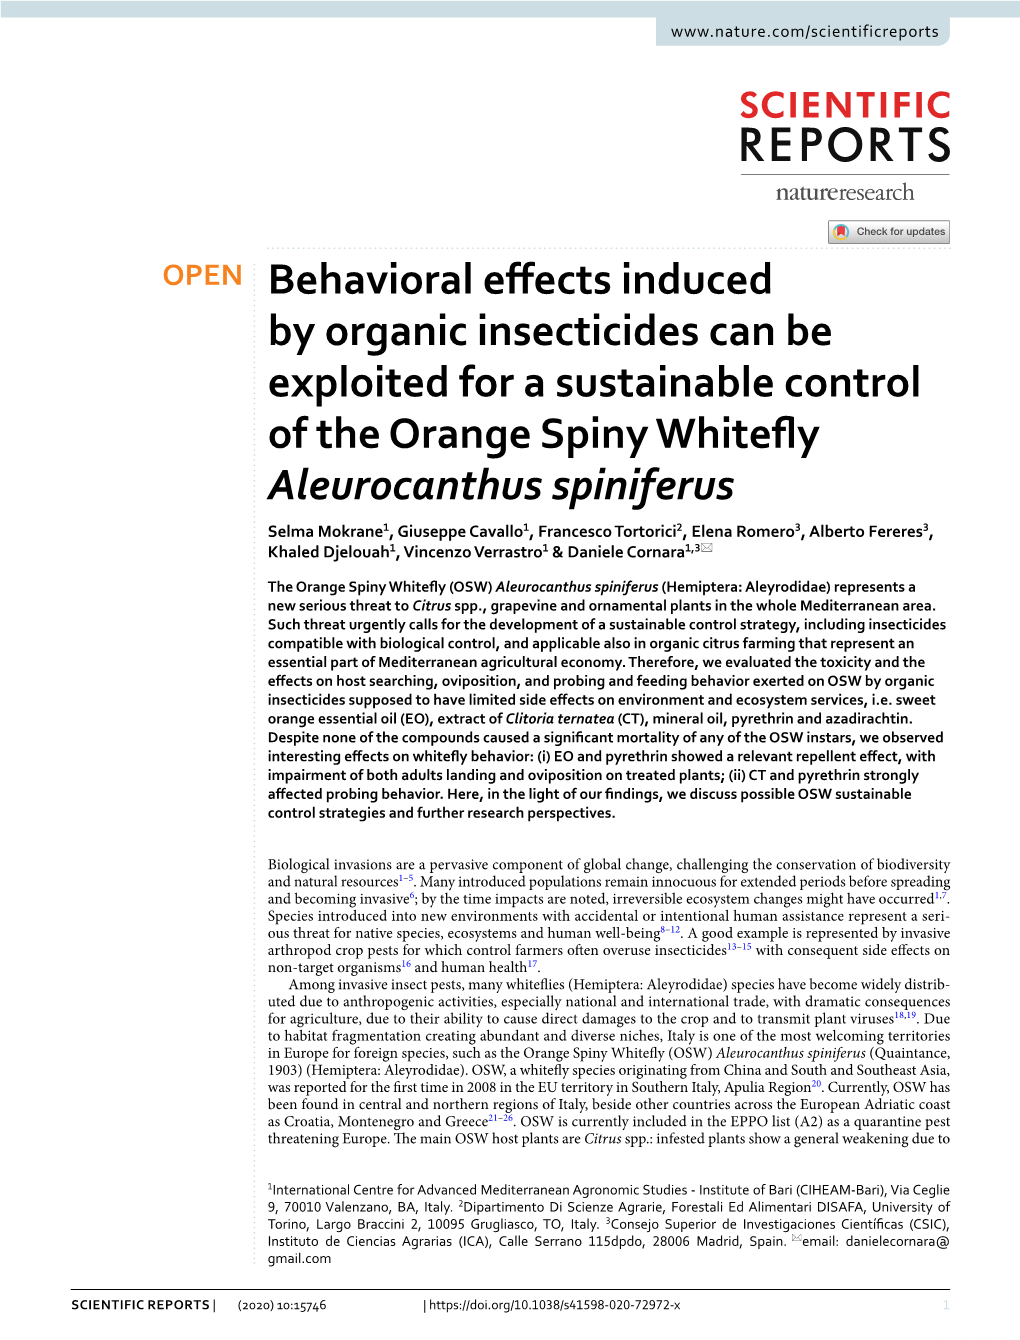 Behavioral Effects Induced by Organic Insecticides Can Be Exploited for A